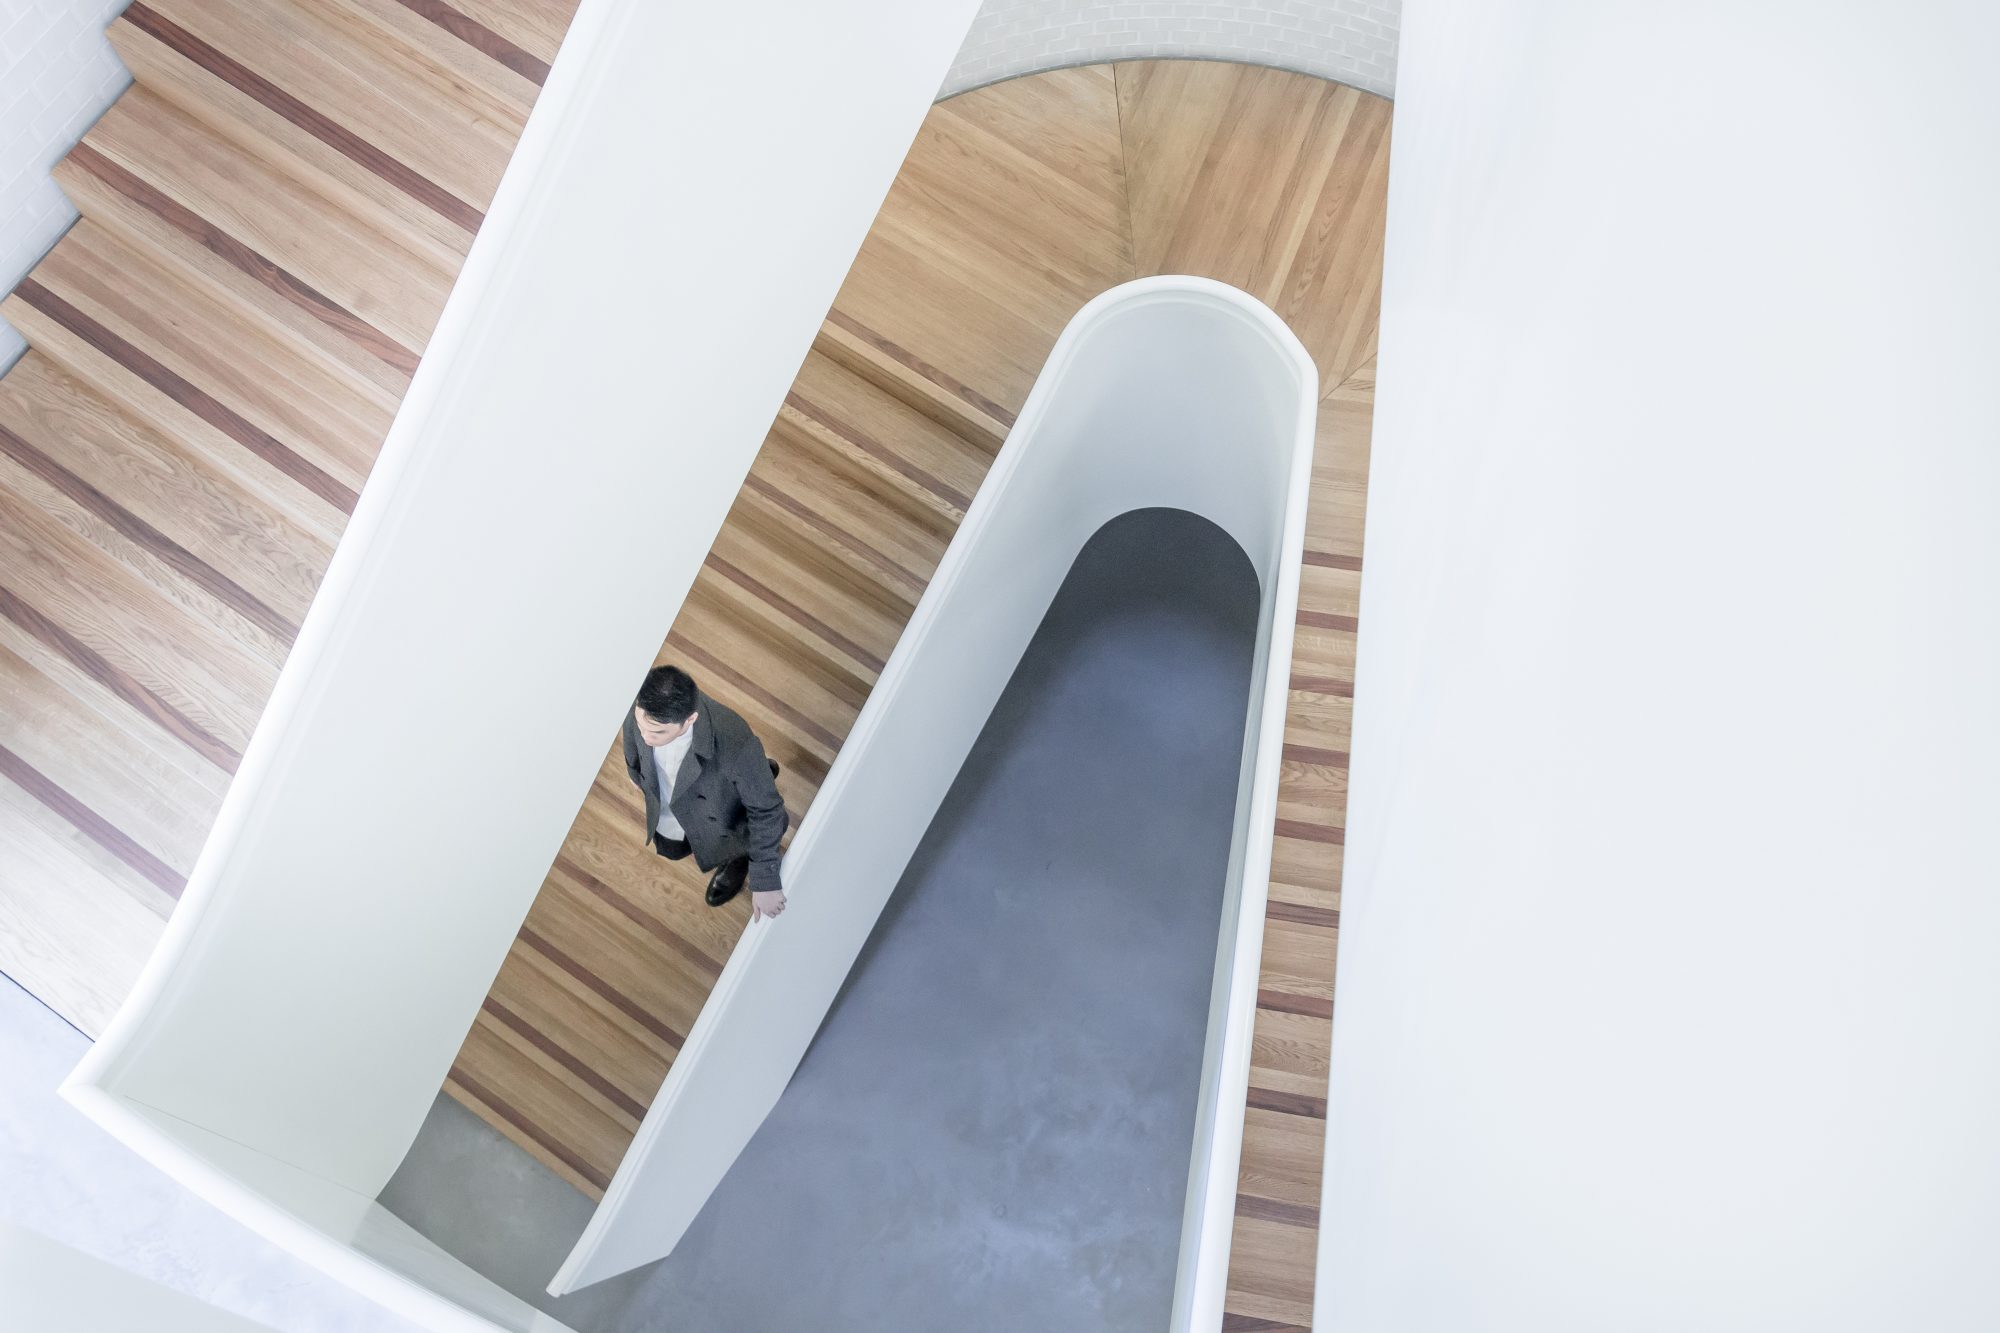 Company stairs with a man walking in it